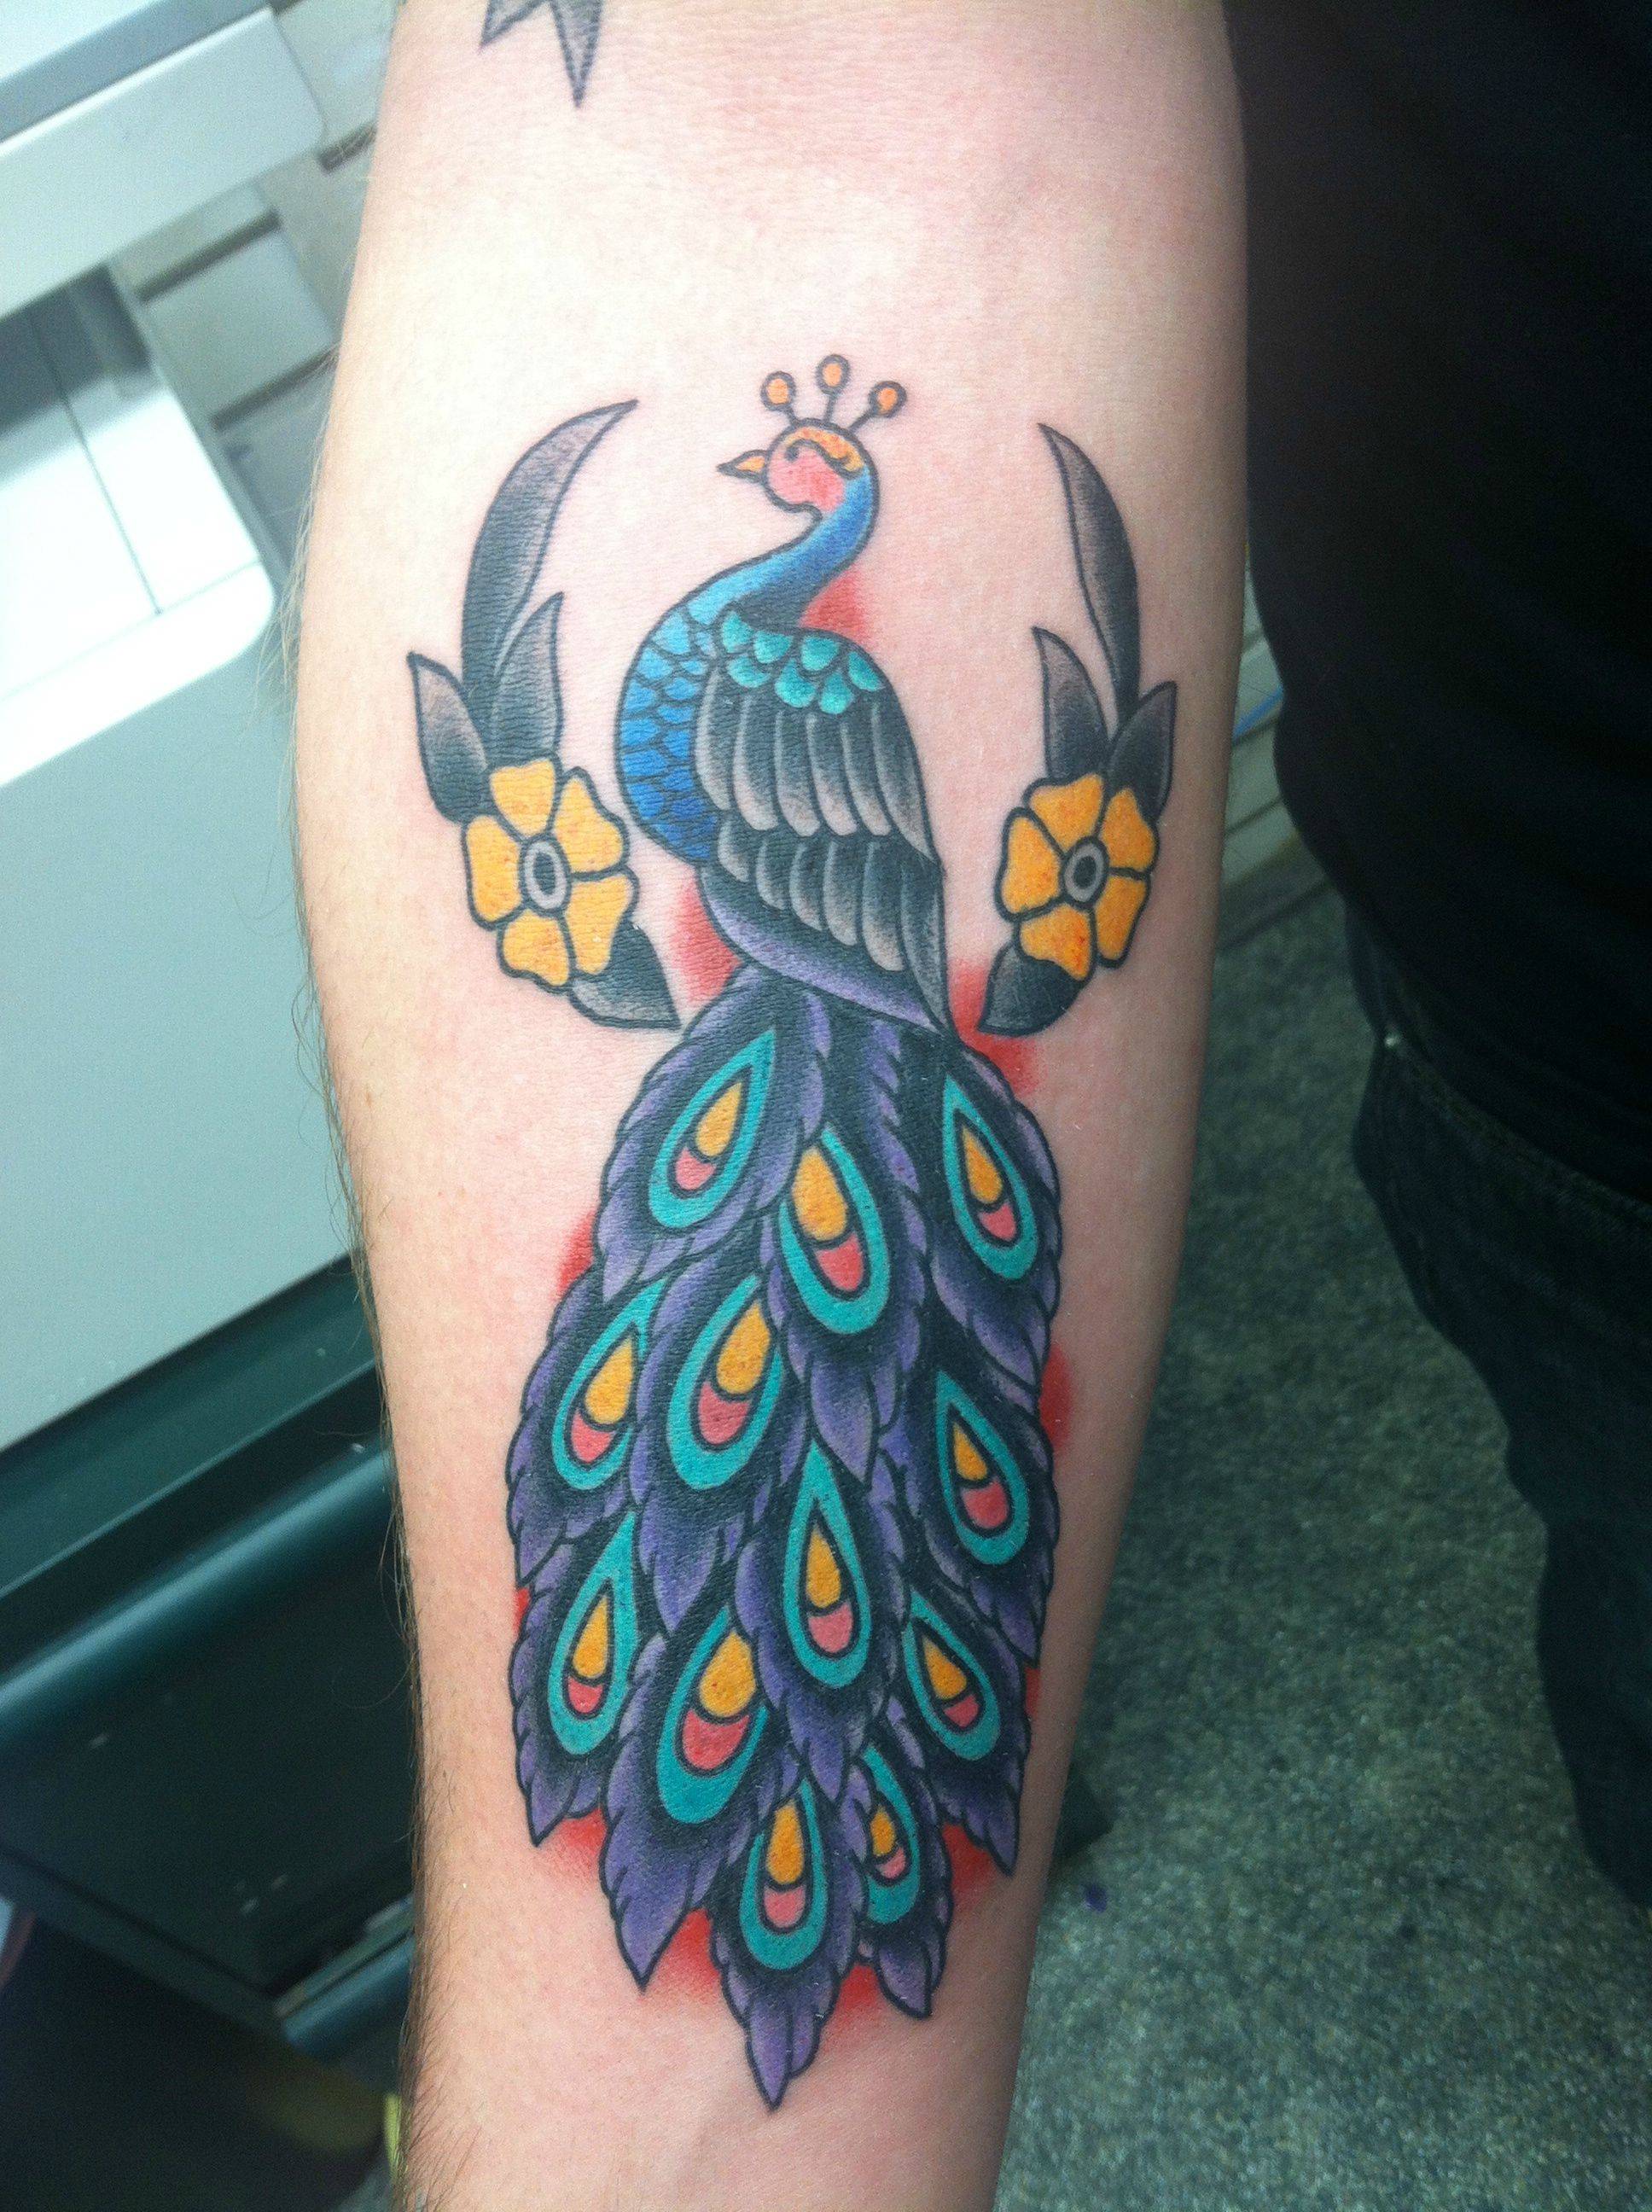 Peacock Tattoos Designs, Ideas and Meaning | Tattoos For You